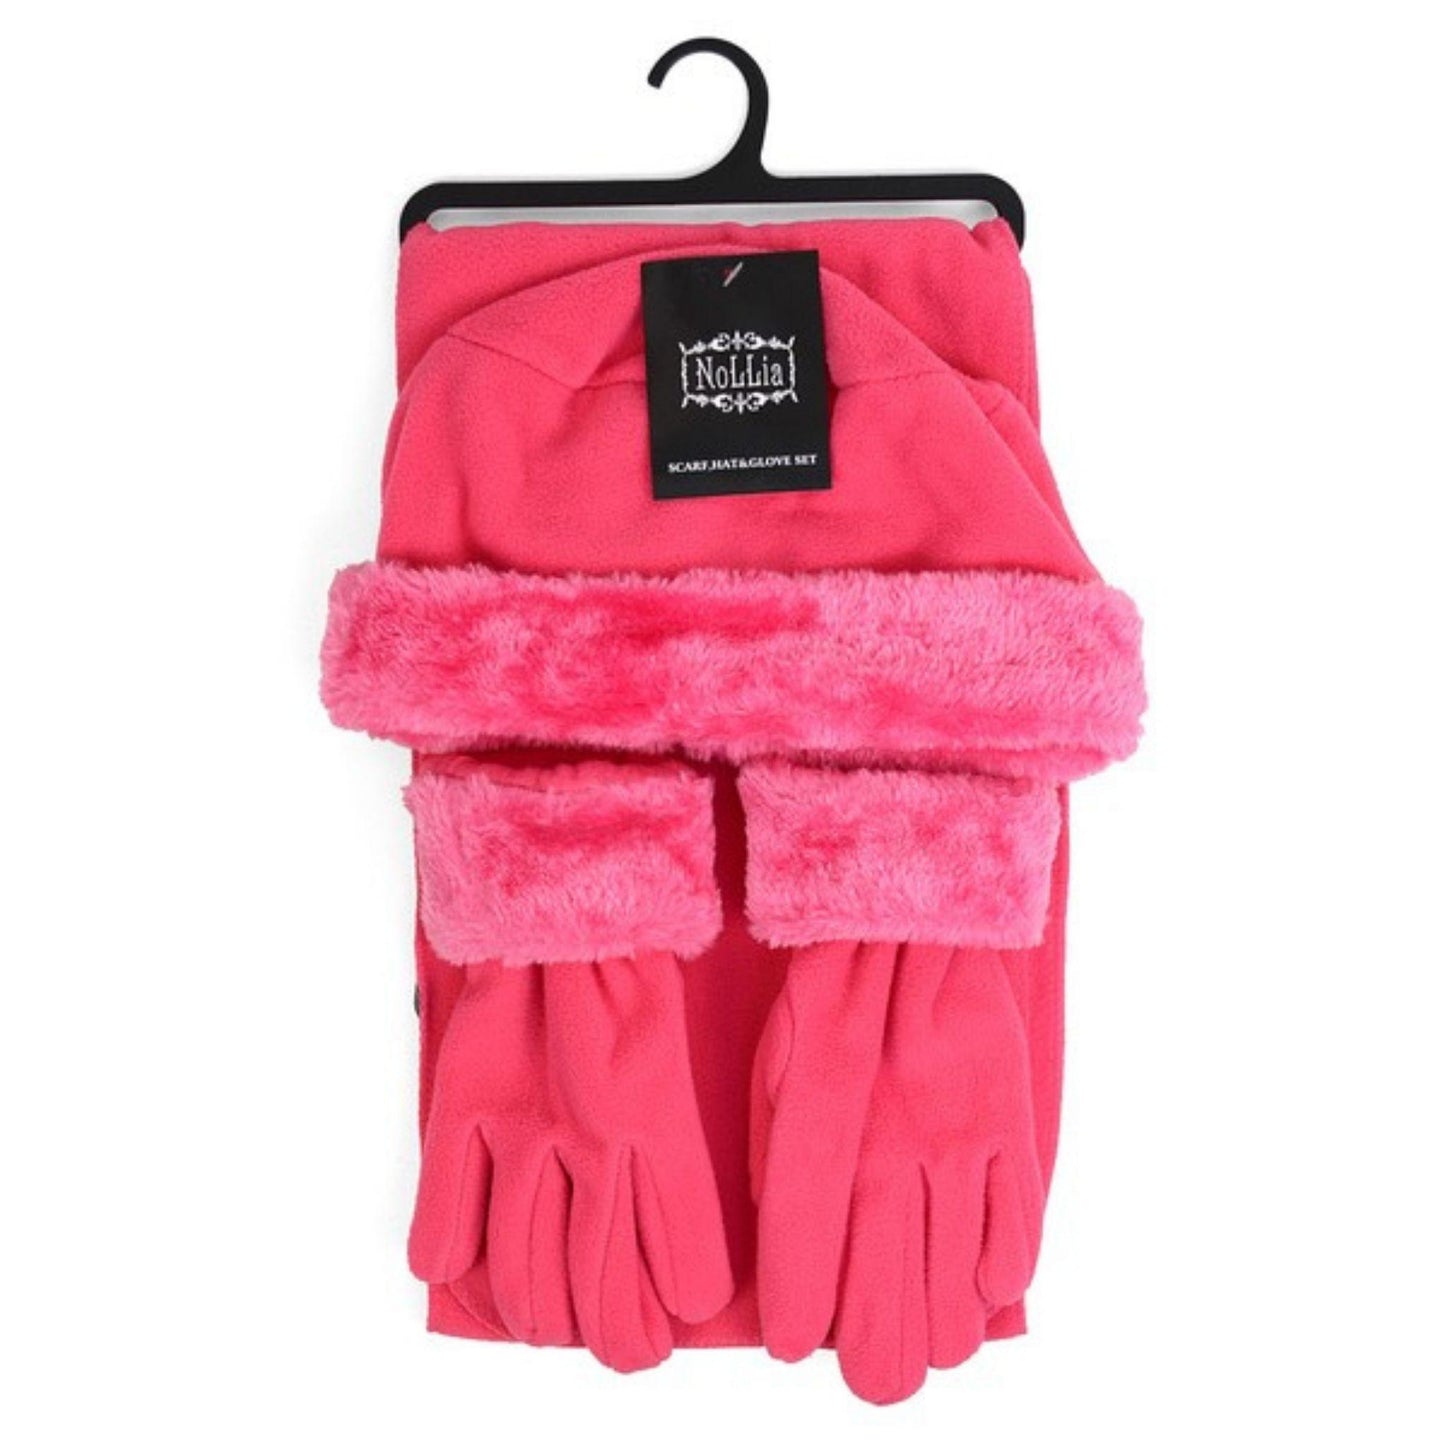 Hot pink hat, scarf, and glove set